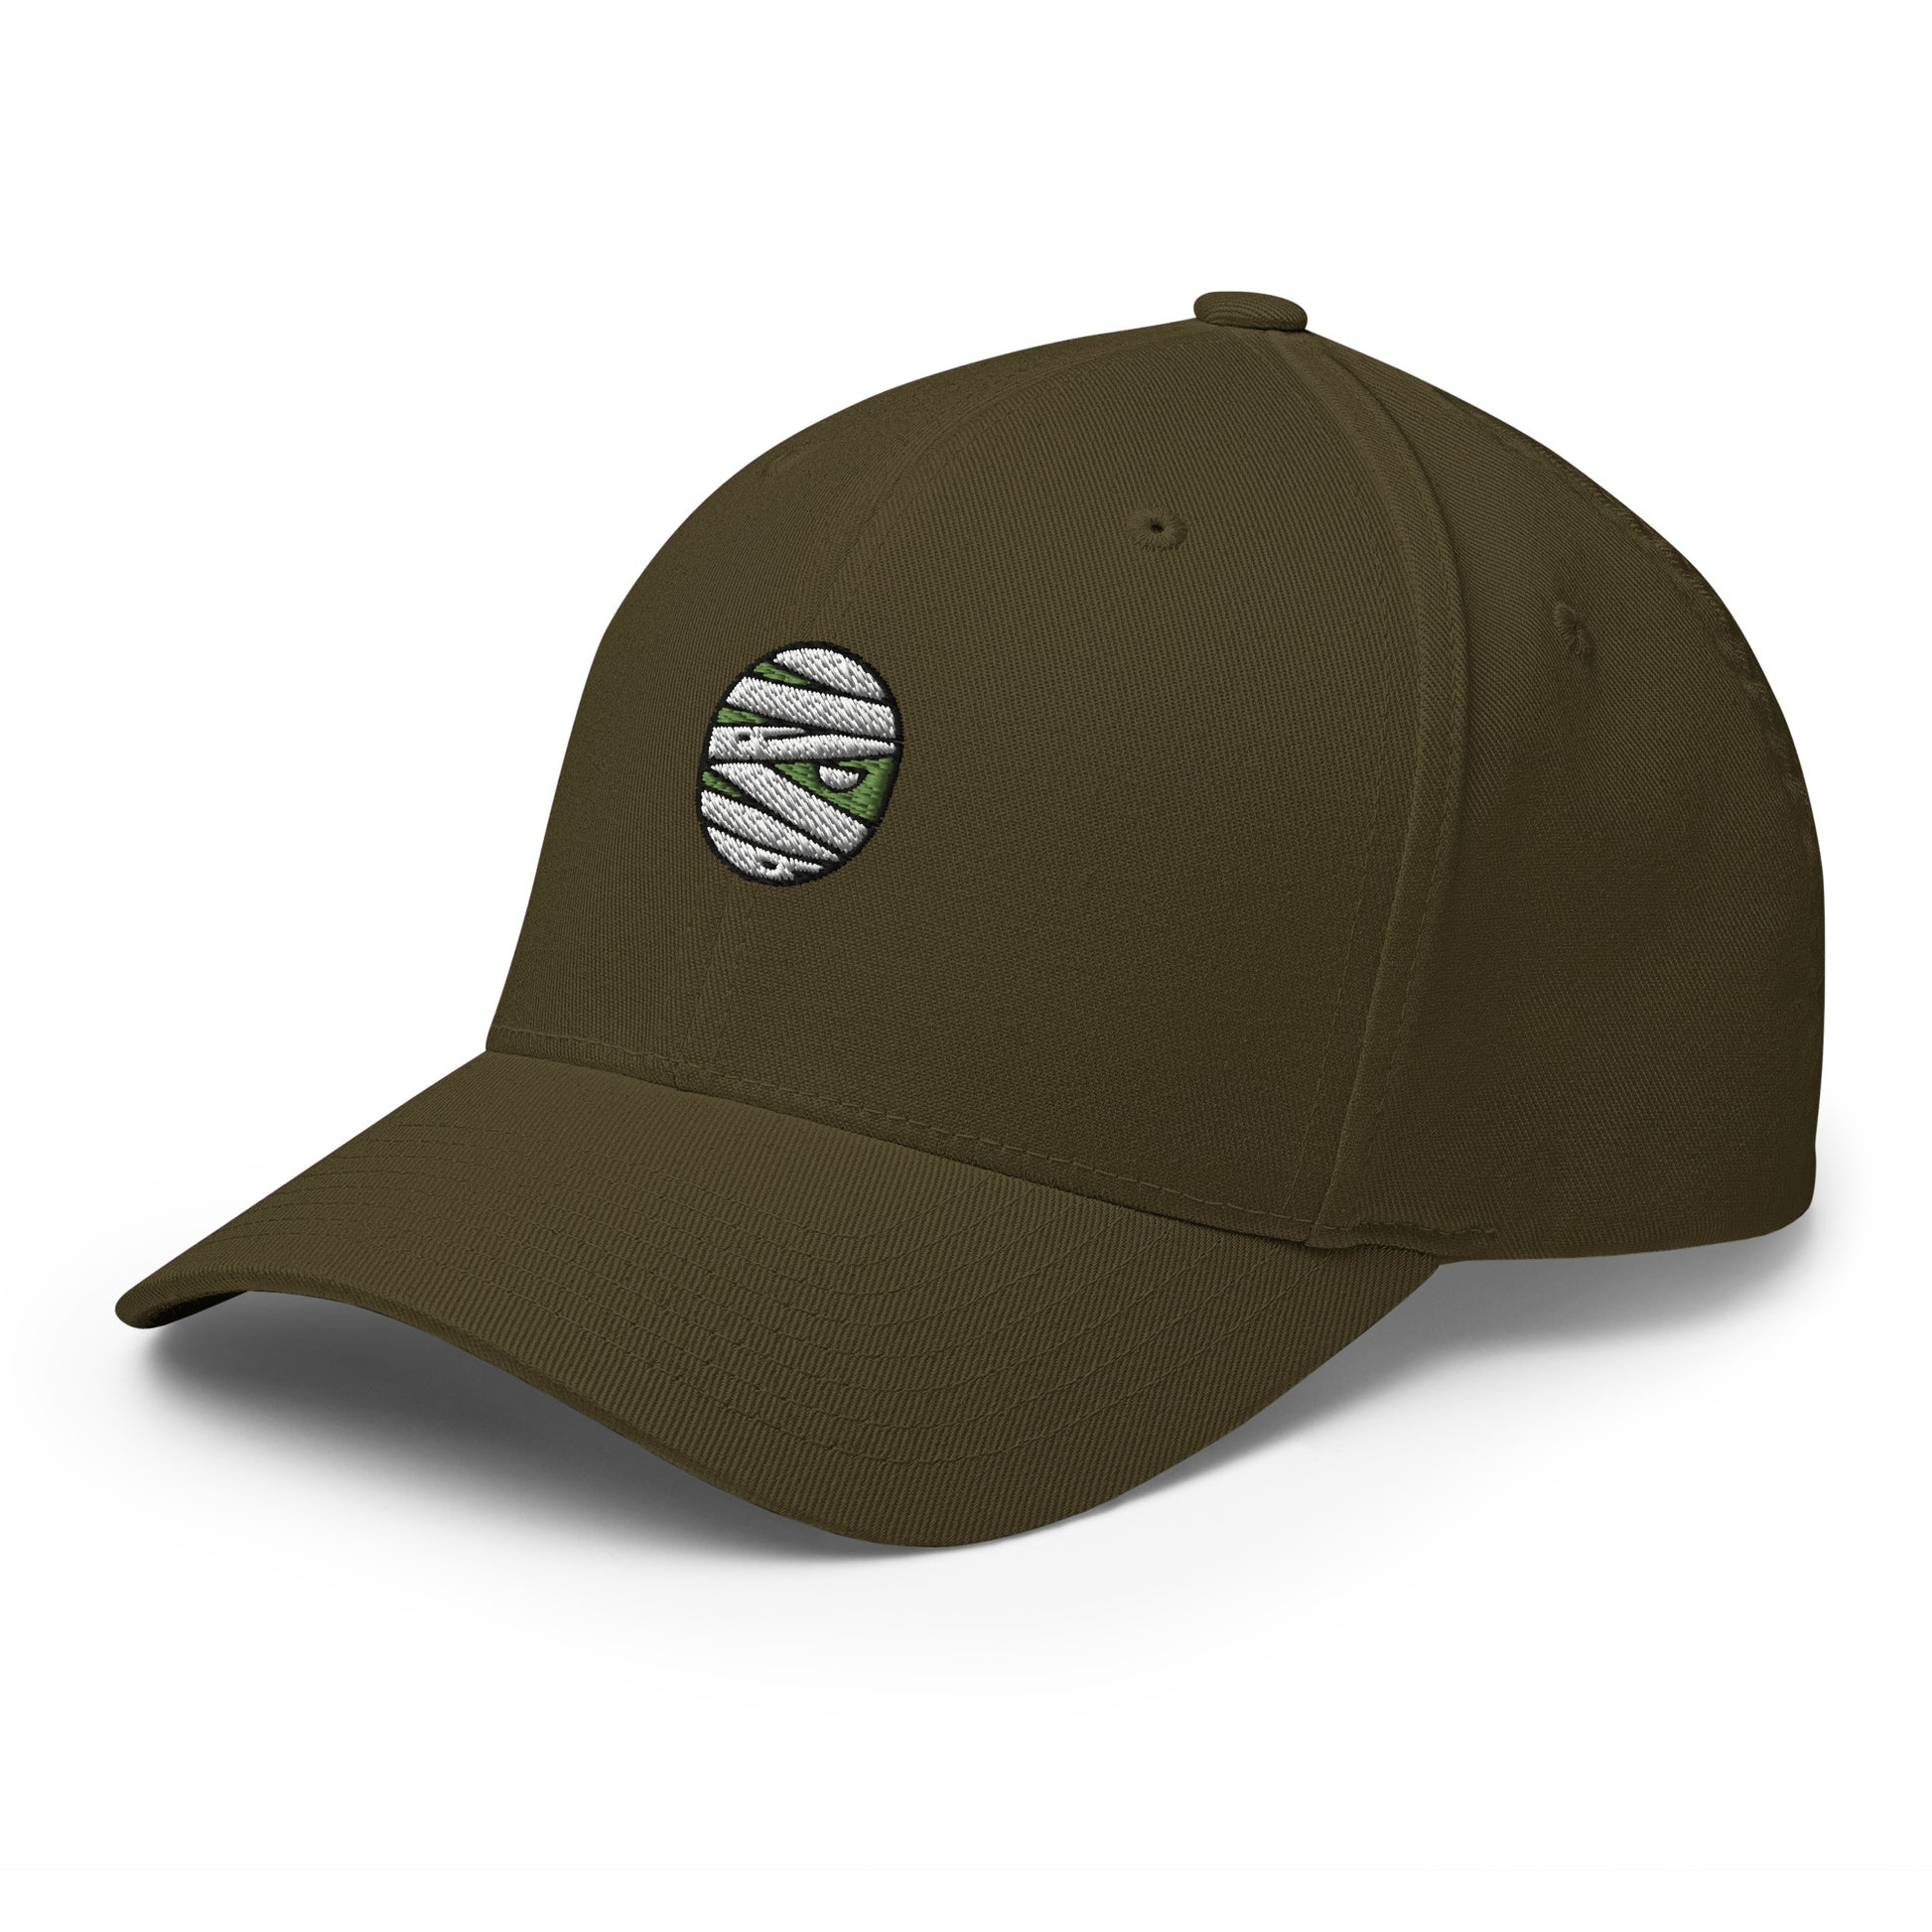  cap-from-the-front-with-mummy-symbol